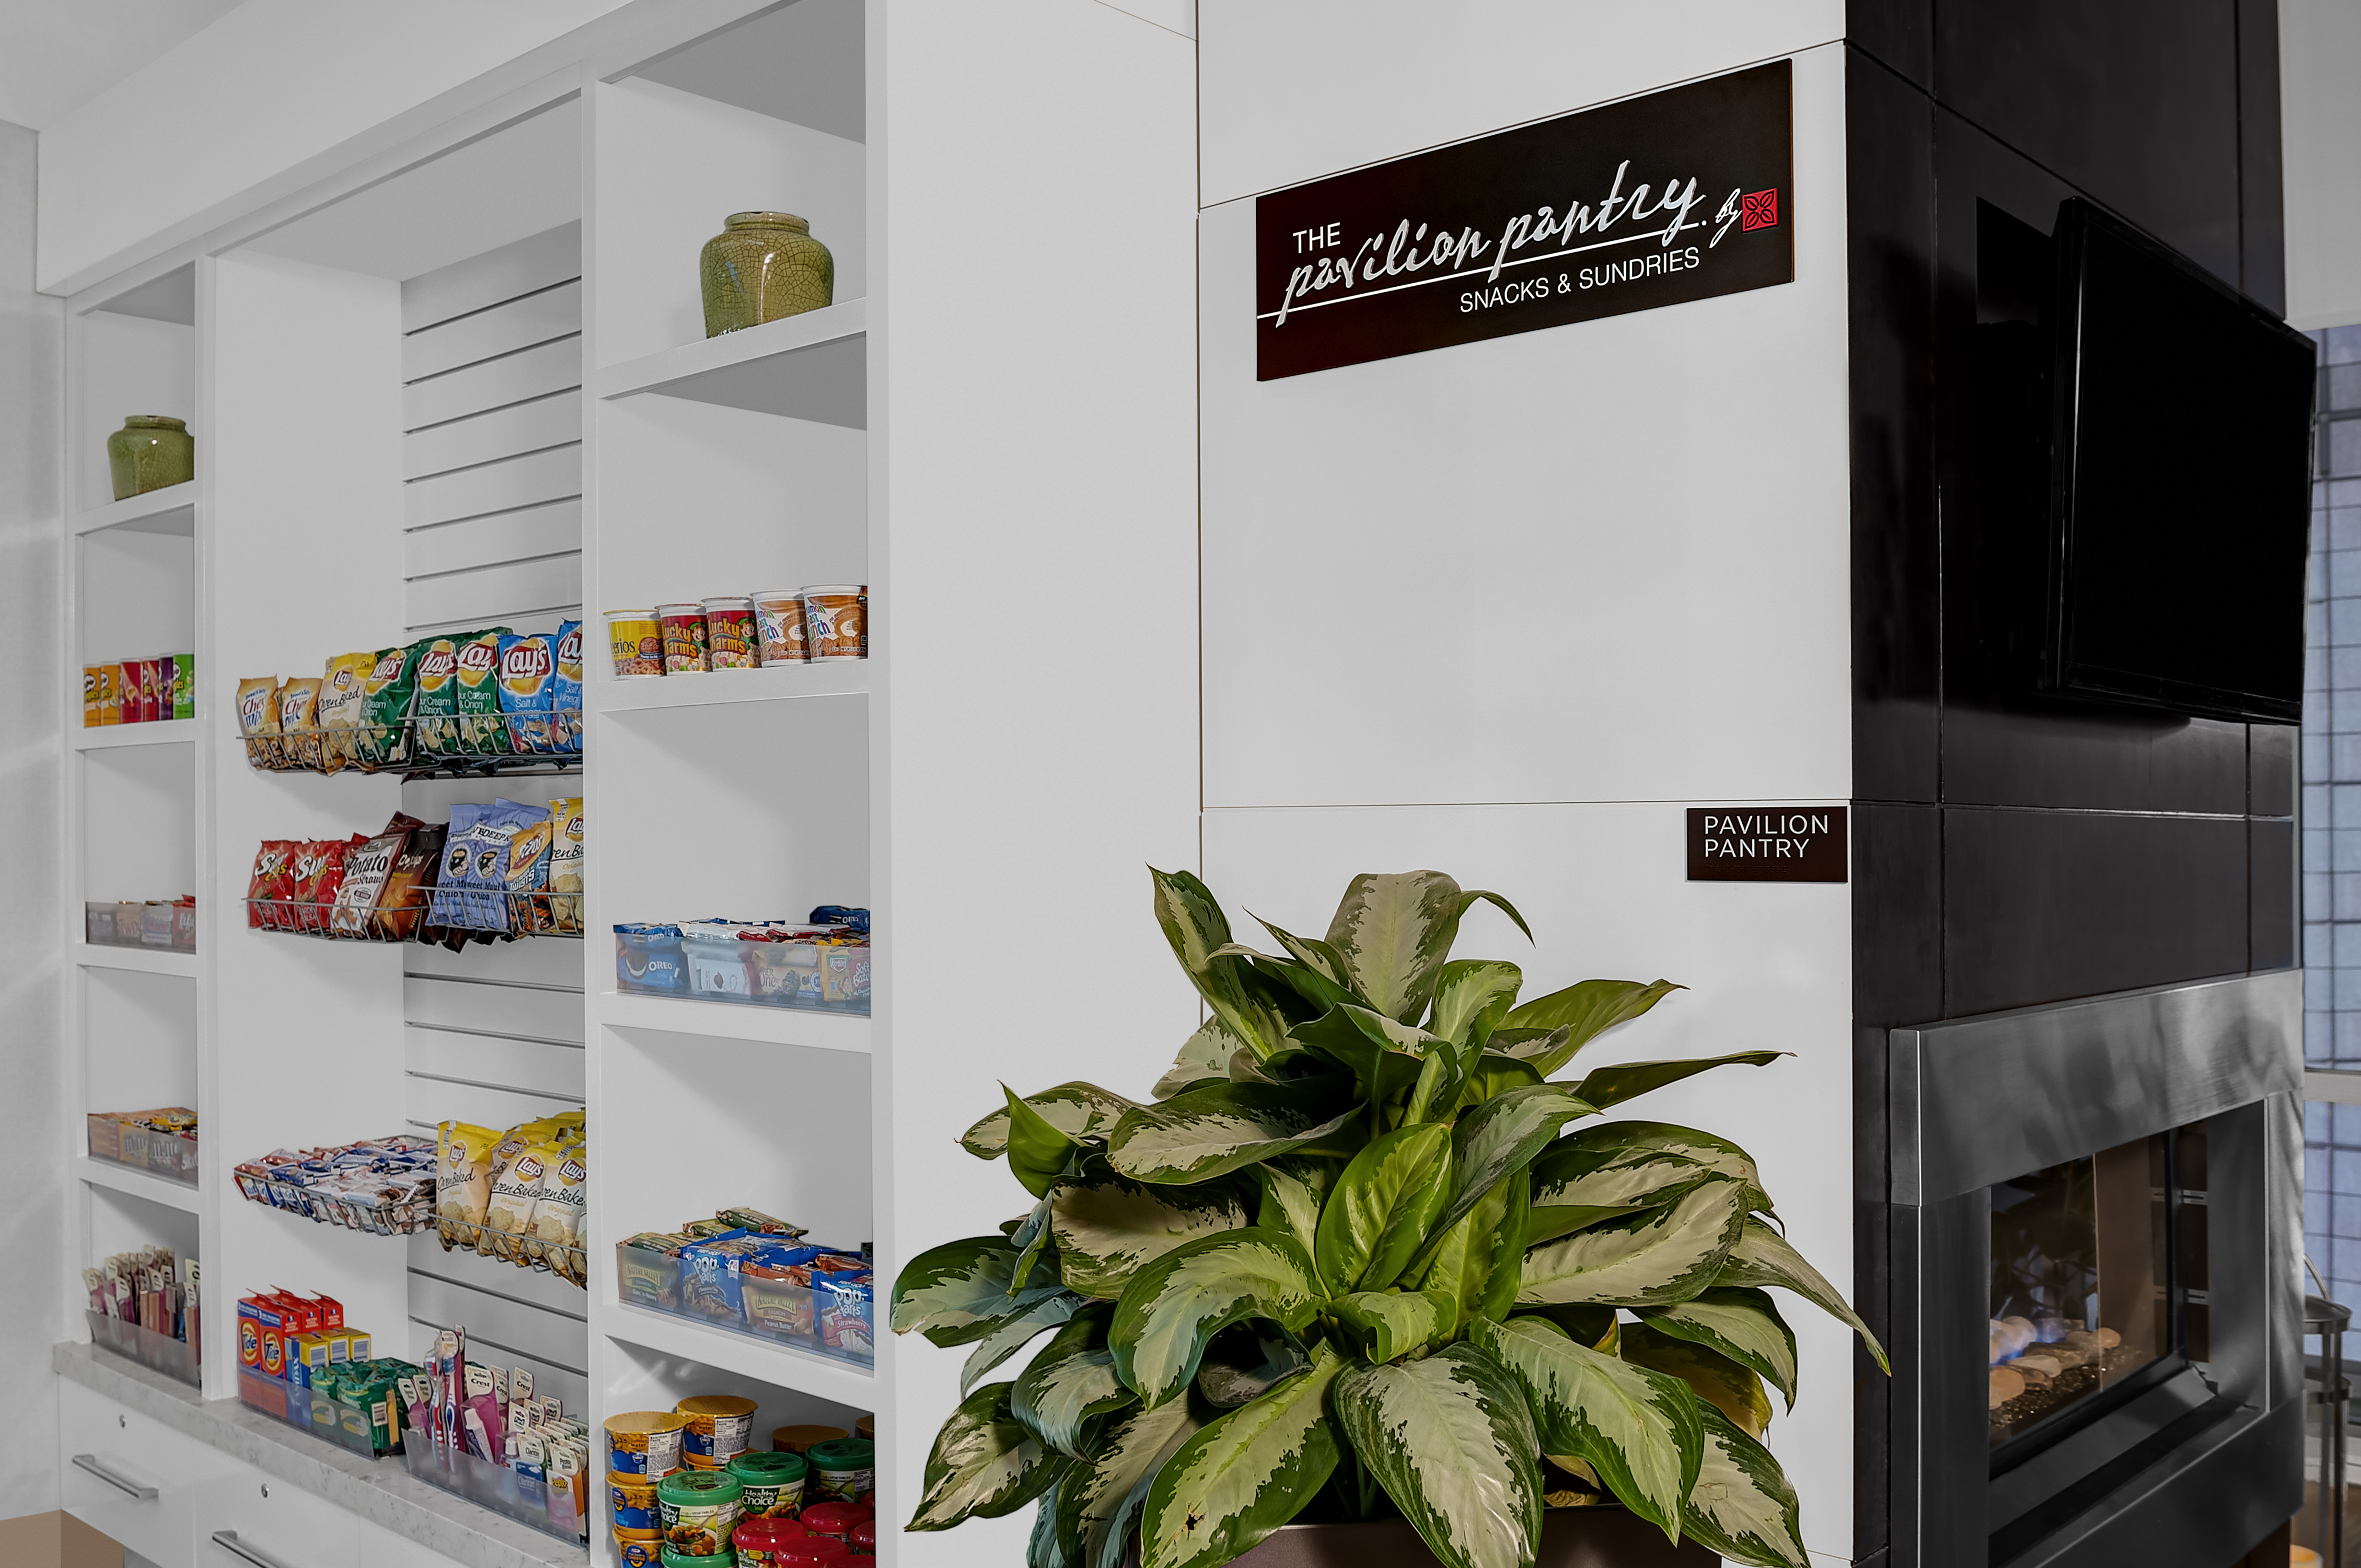 Pavilion Pantry with food on shelves